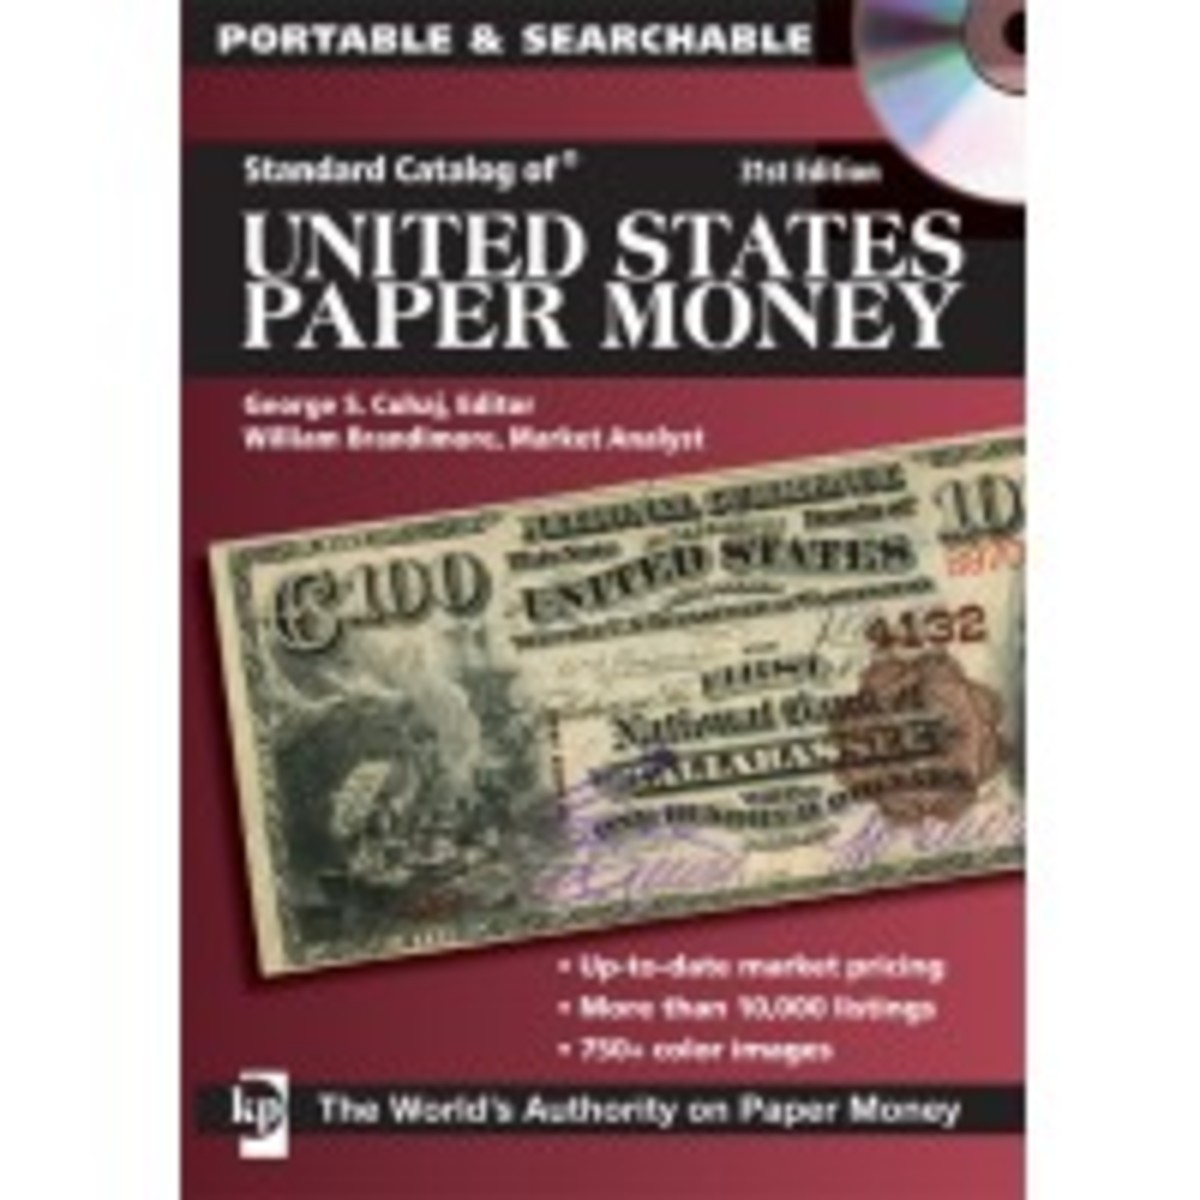 Standard Catalog of United States Paper Money, 31st Edition CD